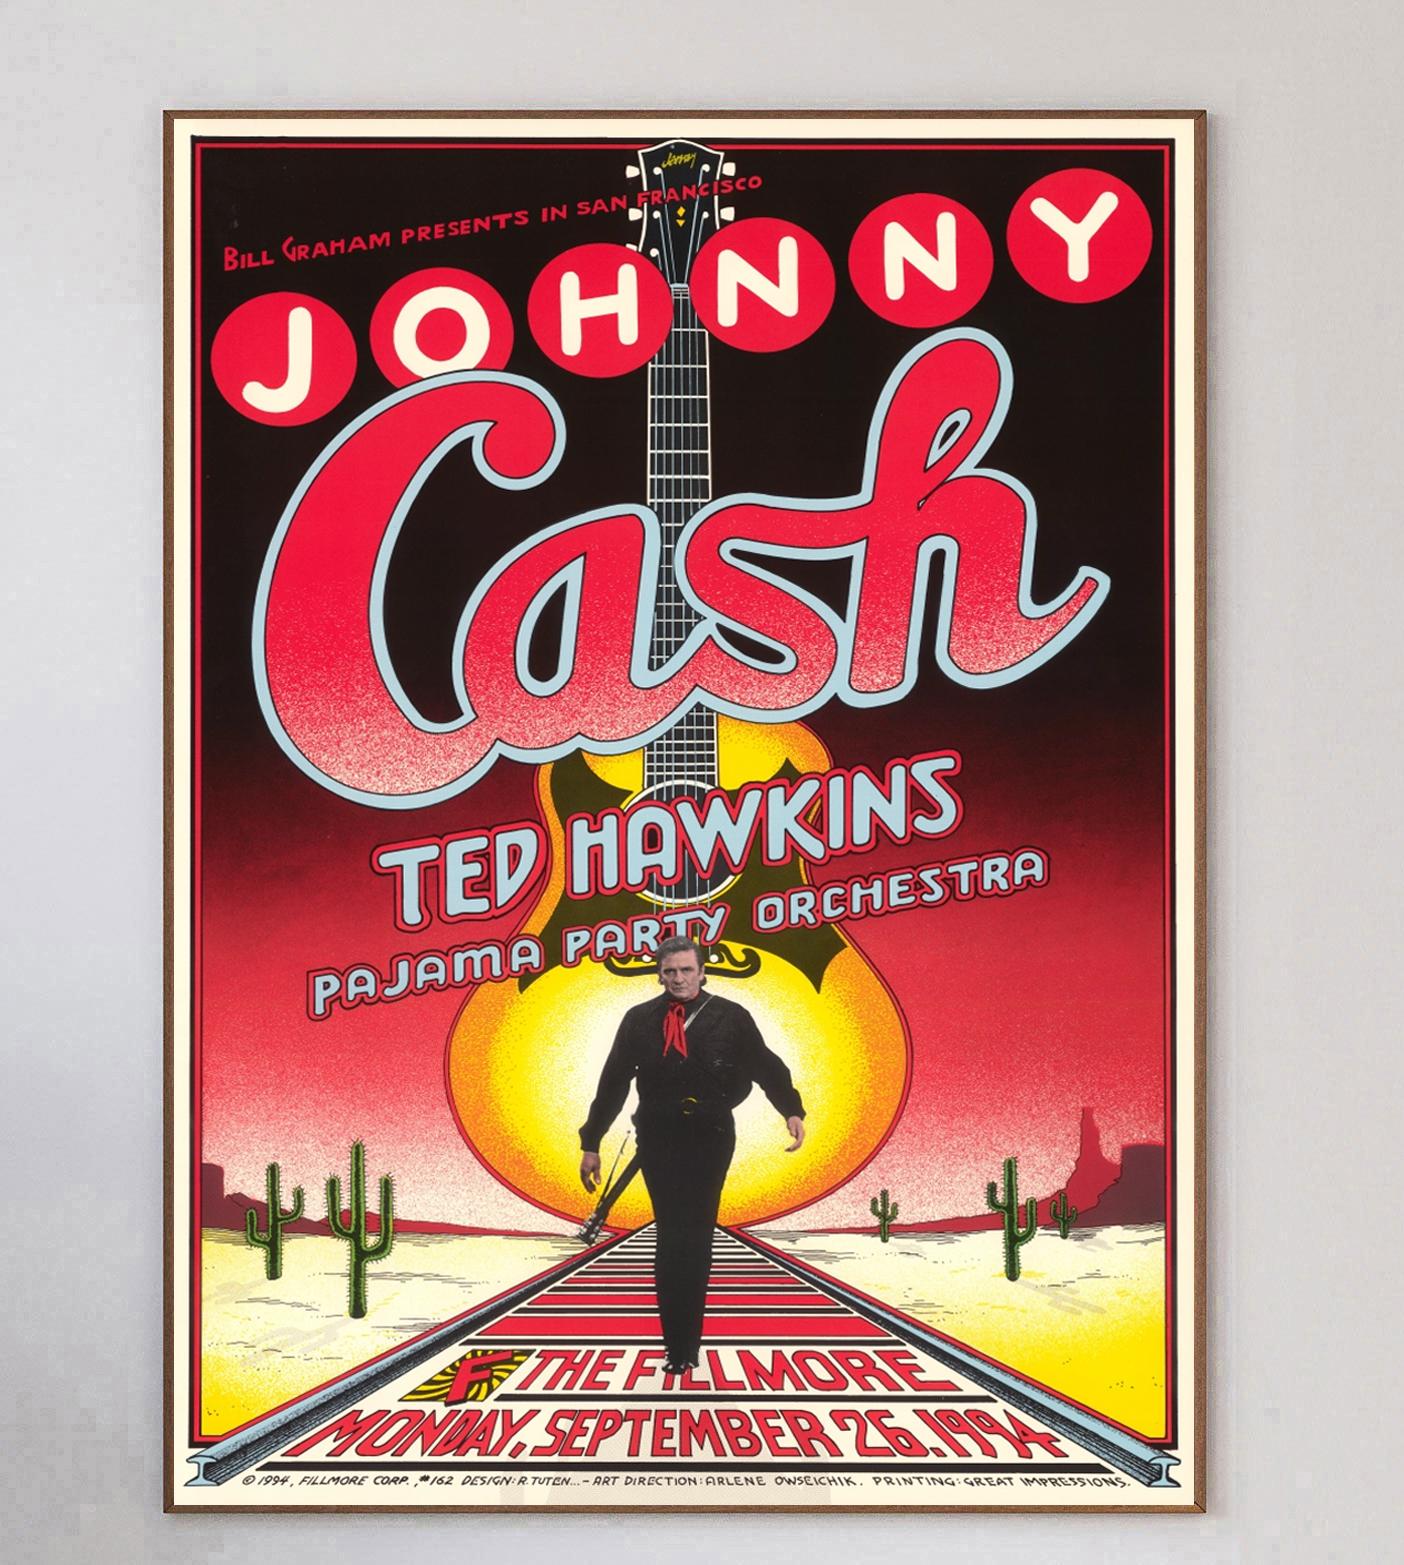 Designed by legendary concert poster artist Randy Tuten, this beautiful poster was created in 1994 to promote a live concert of Johnny Cash at the world famous Fillmore in San Francisco. Bill Graham events such as this were well known for their now